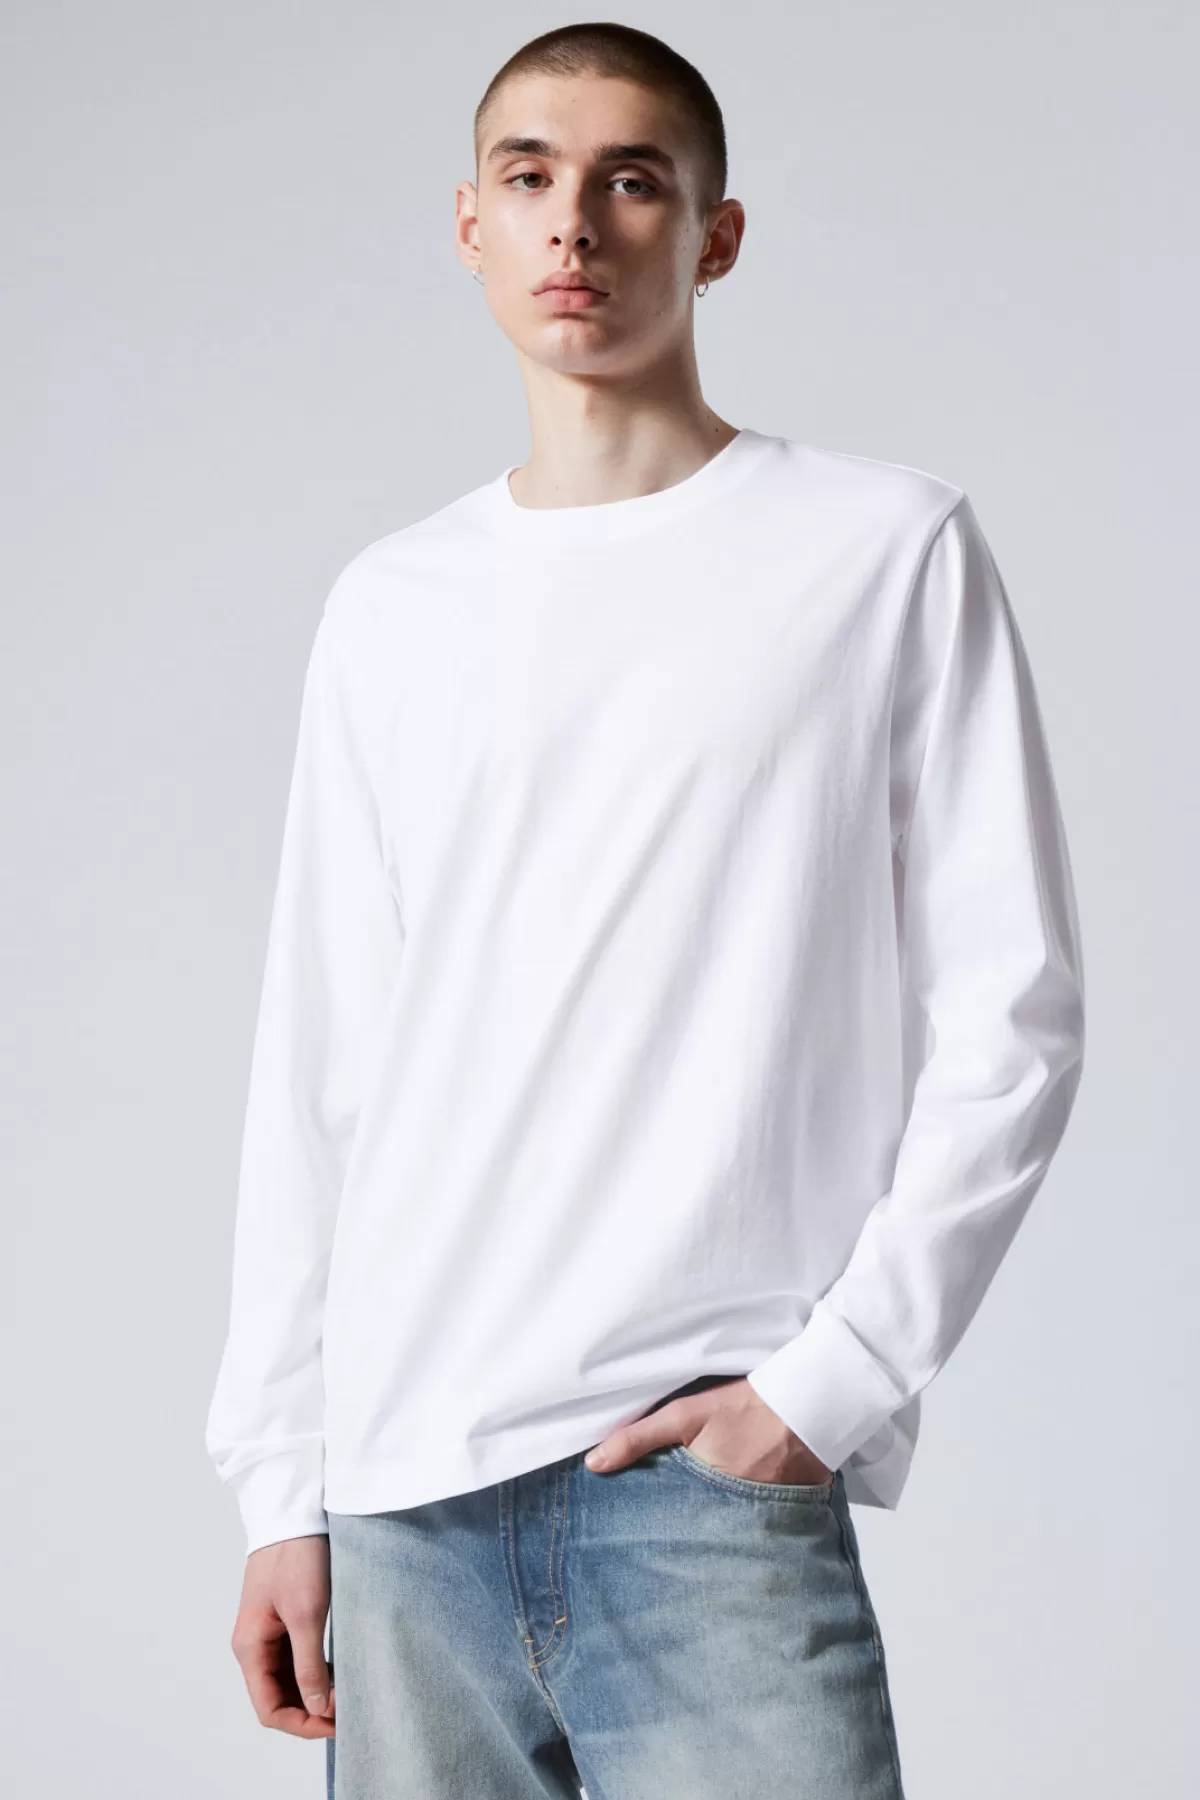 Weekday Relaxed Midweight Long Sleeve White Hot